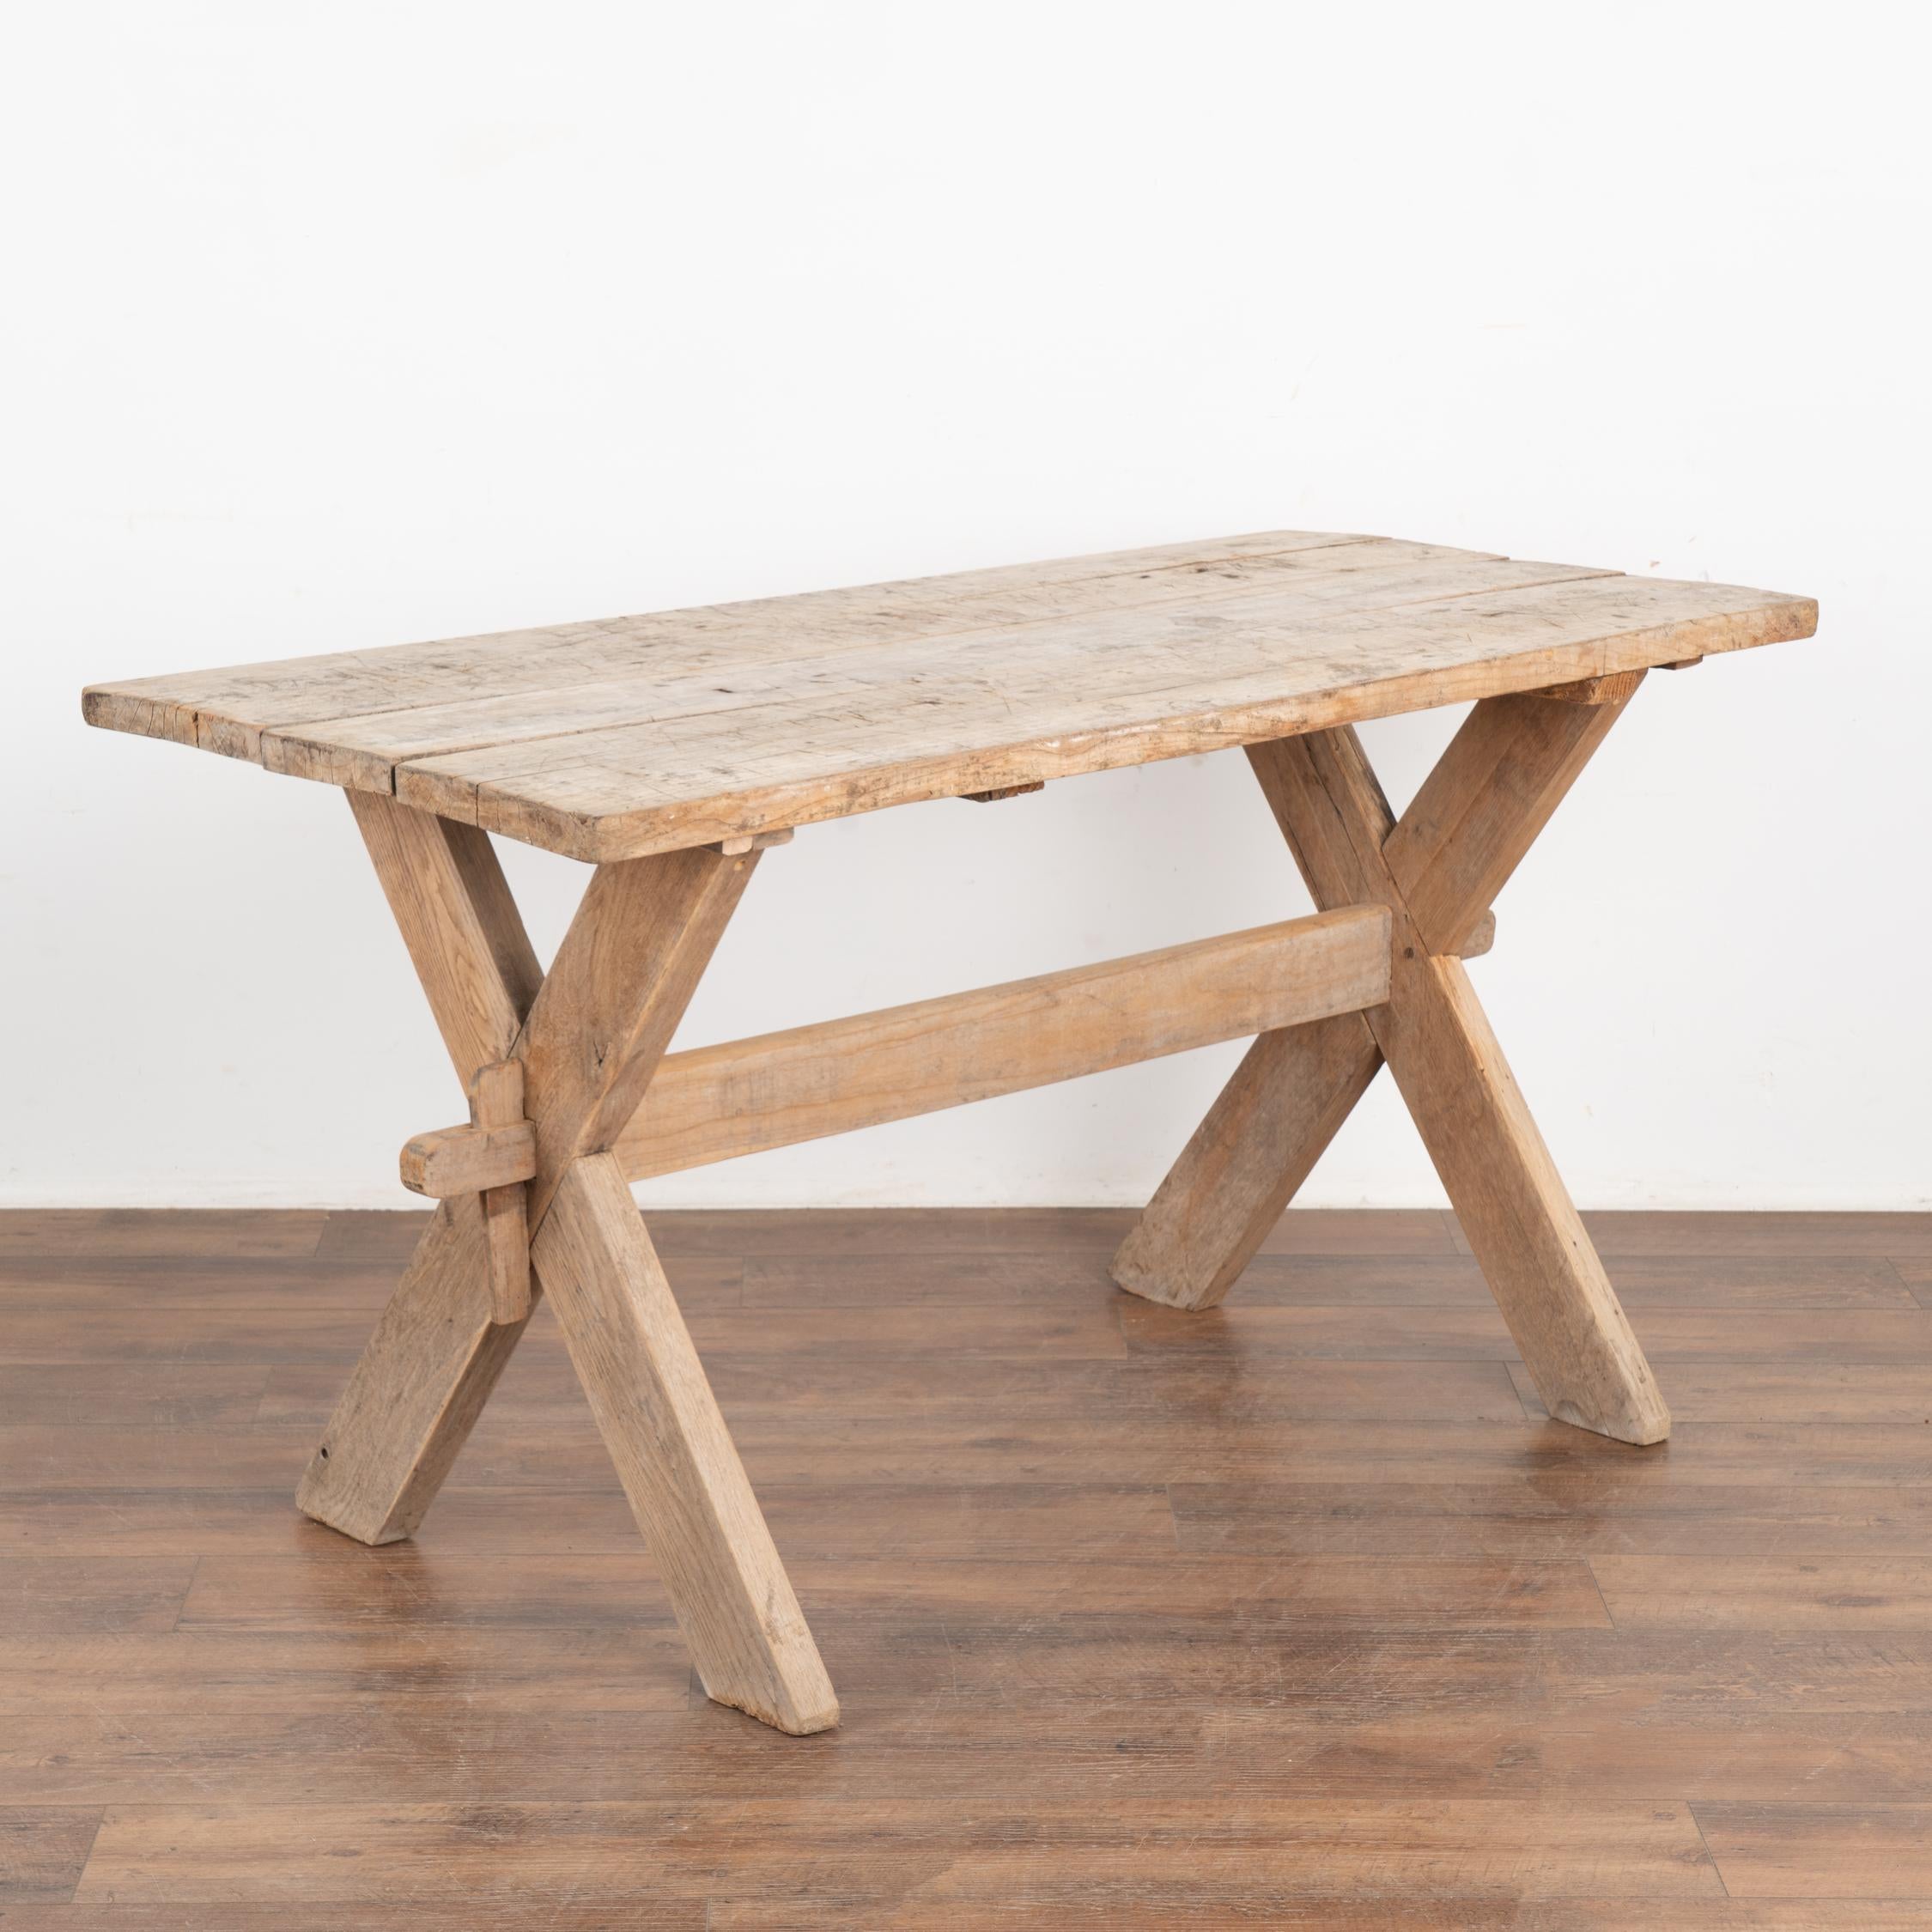 This farmhouse kitchen table has European country charm thanks to the unique X-stretcher base.
The natural wood has been distressed through generations of use, adding depth to the character of the table. The many scratches, dings, gougest, stains